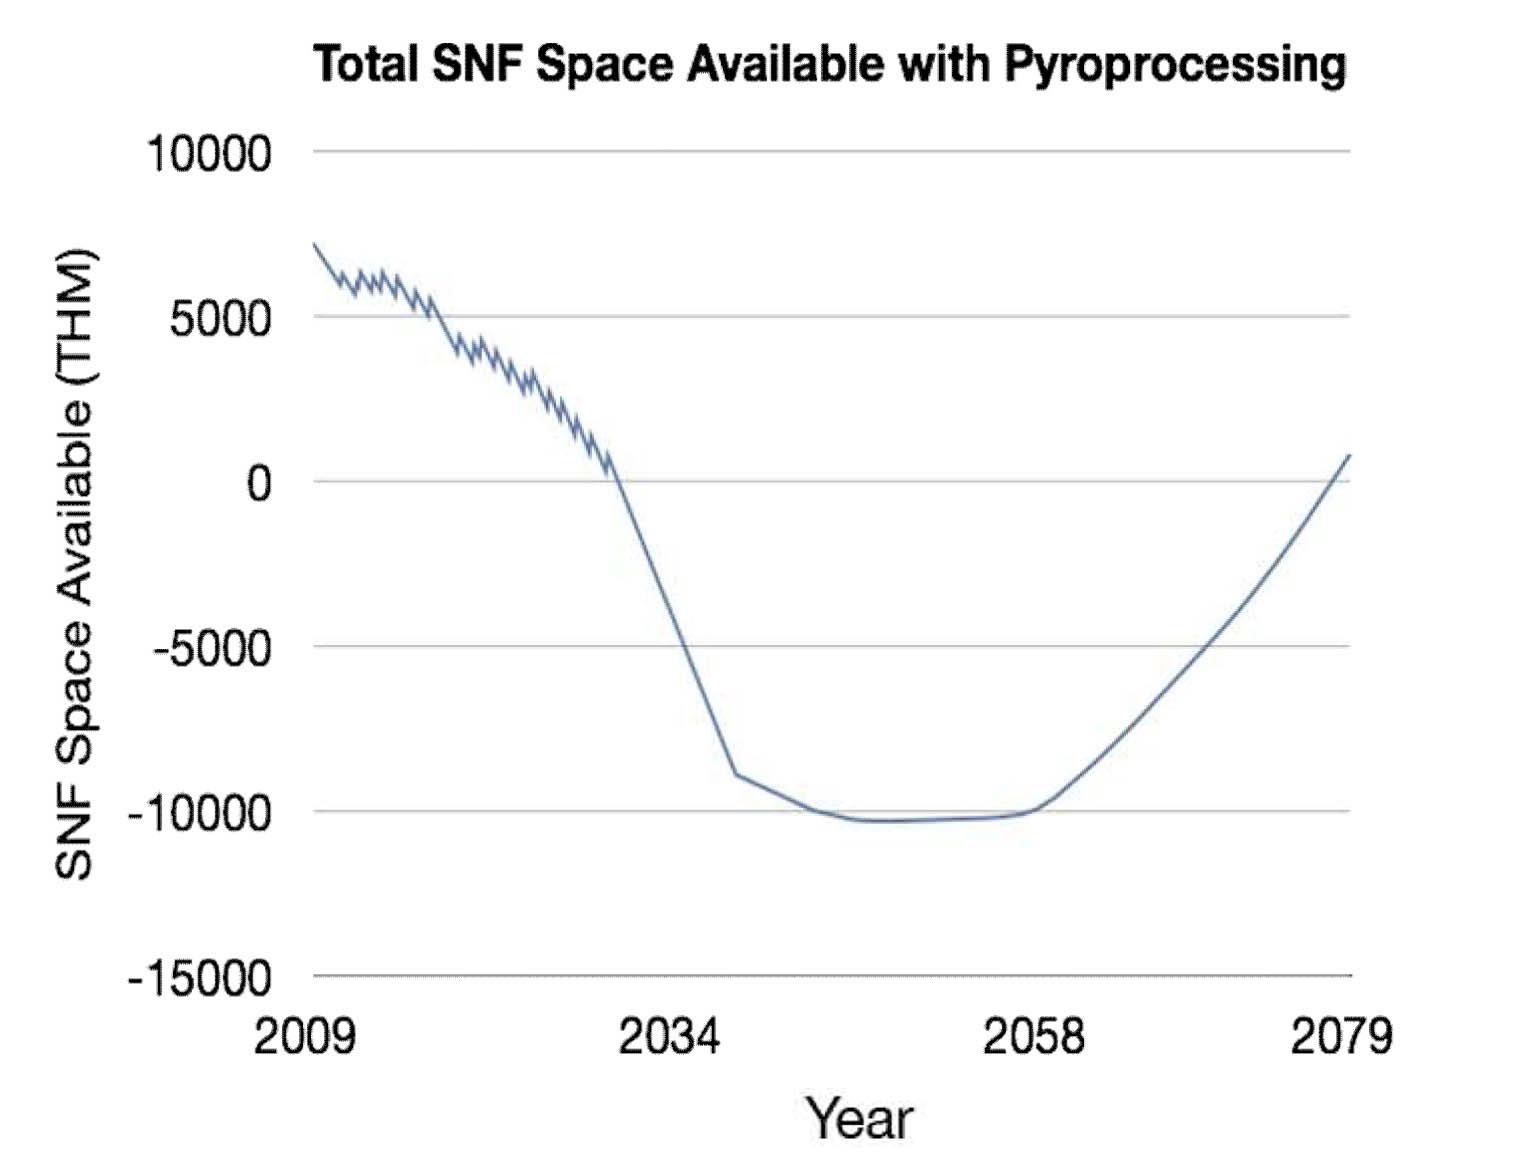 Total SNF Storage Space Available under an Optimistic Pyroprocessing Scenario. Until 2029, New NPPs’ SNF Pool Capacity is used, in 2028 a Demonstration 100 MT/yr Pyroprocessing Facility is in Operation, in 2038 a Commercial 1,000 MT/yr Pyroprocessing Facility Comes Online. Despite These Optimistic Assumptions, all Storage is Saturated (SNF Space Available < 0 MT) by 2030 and Additional SNF Storage of ？ 10 kMT is Required.